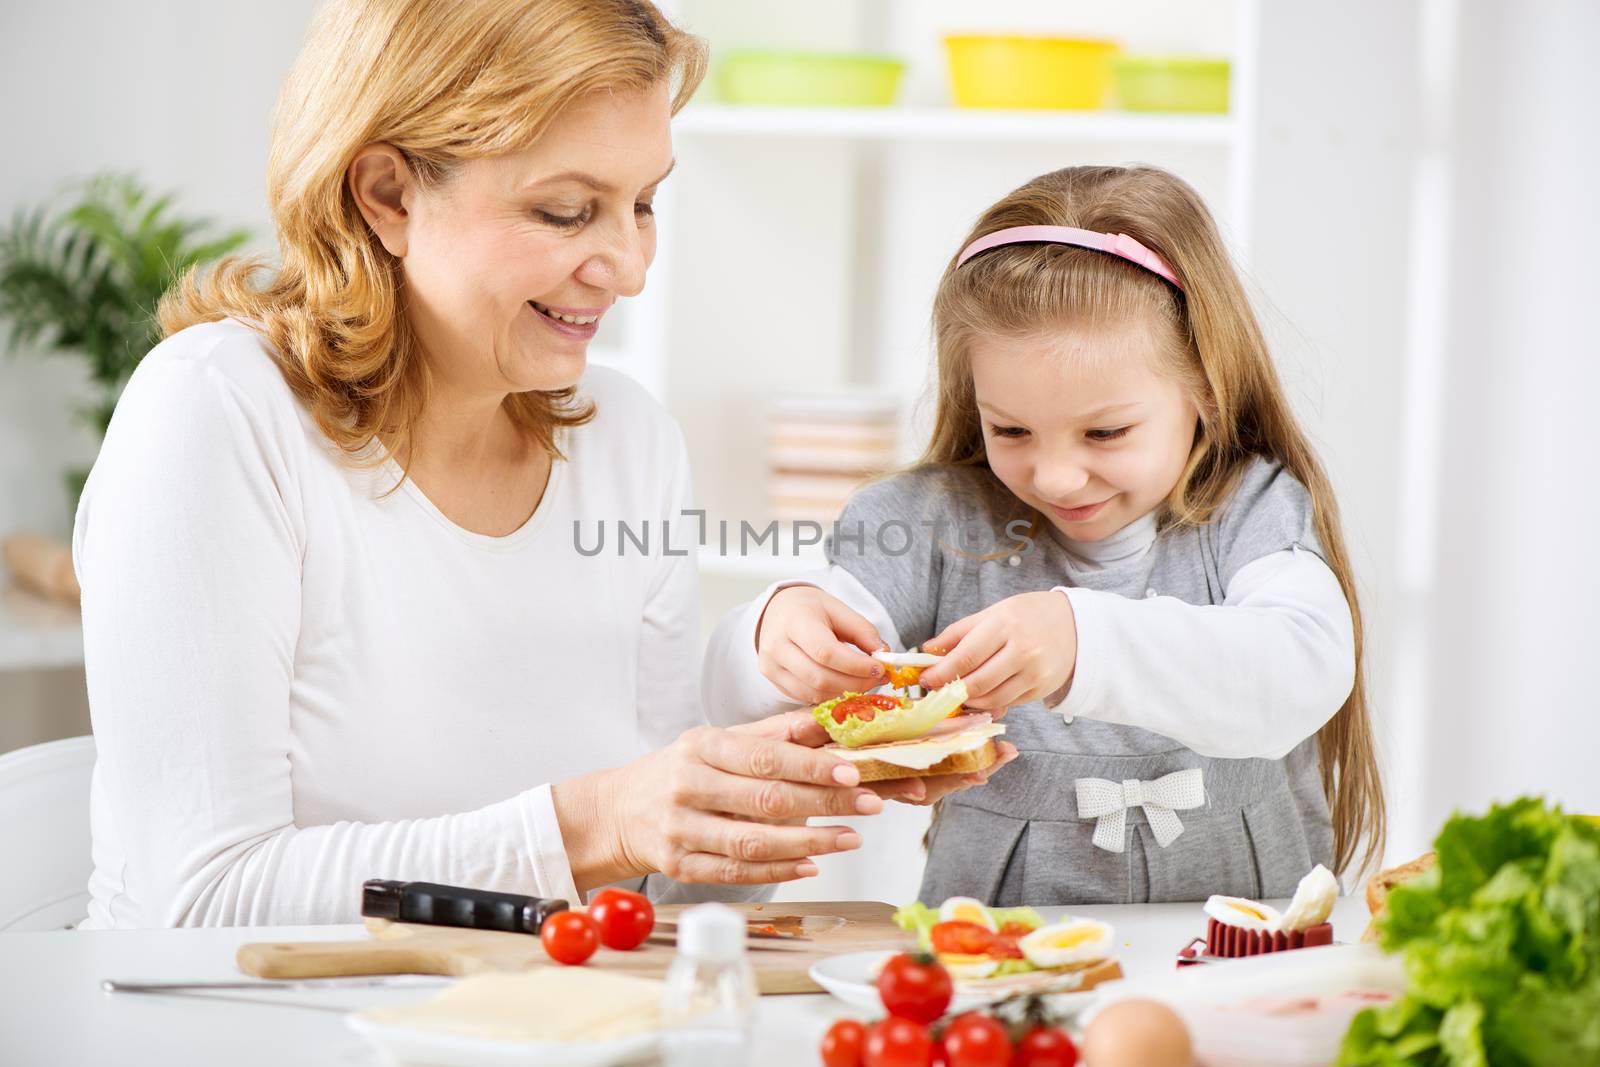 Beautiful happy grandmother and her cute granddaughter making a Sandwich in the kitchen.